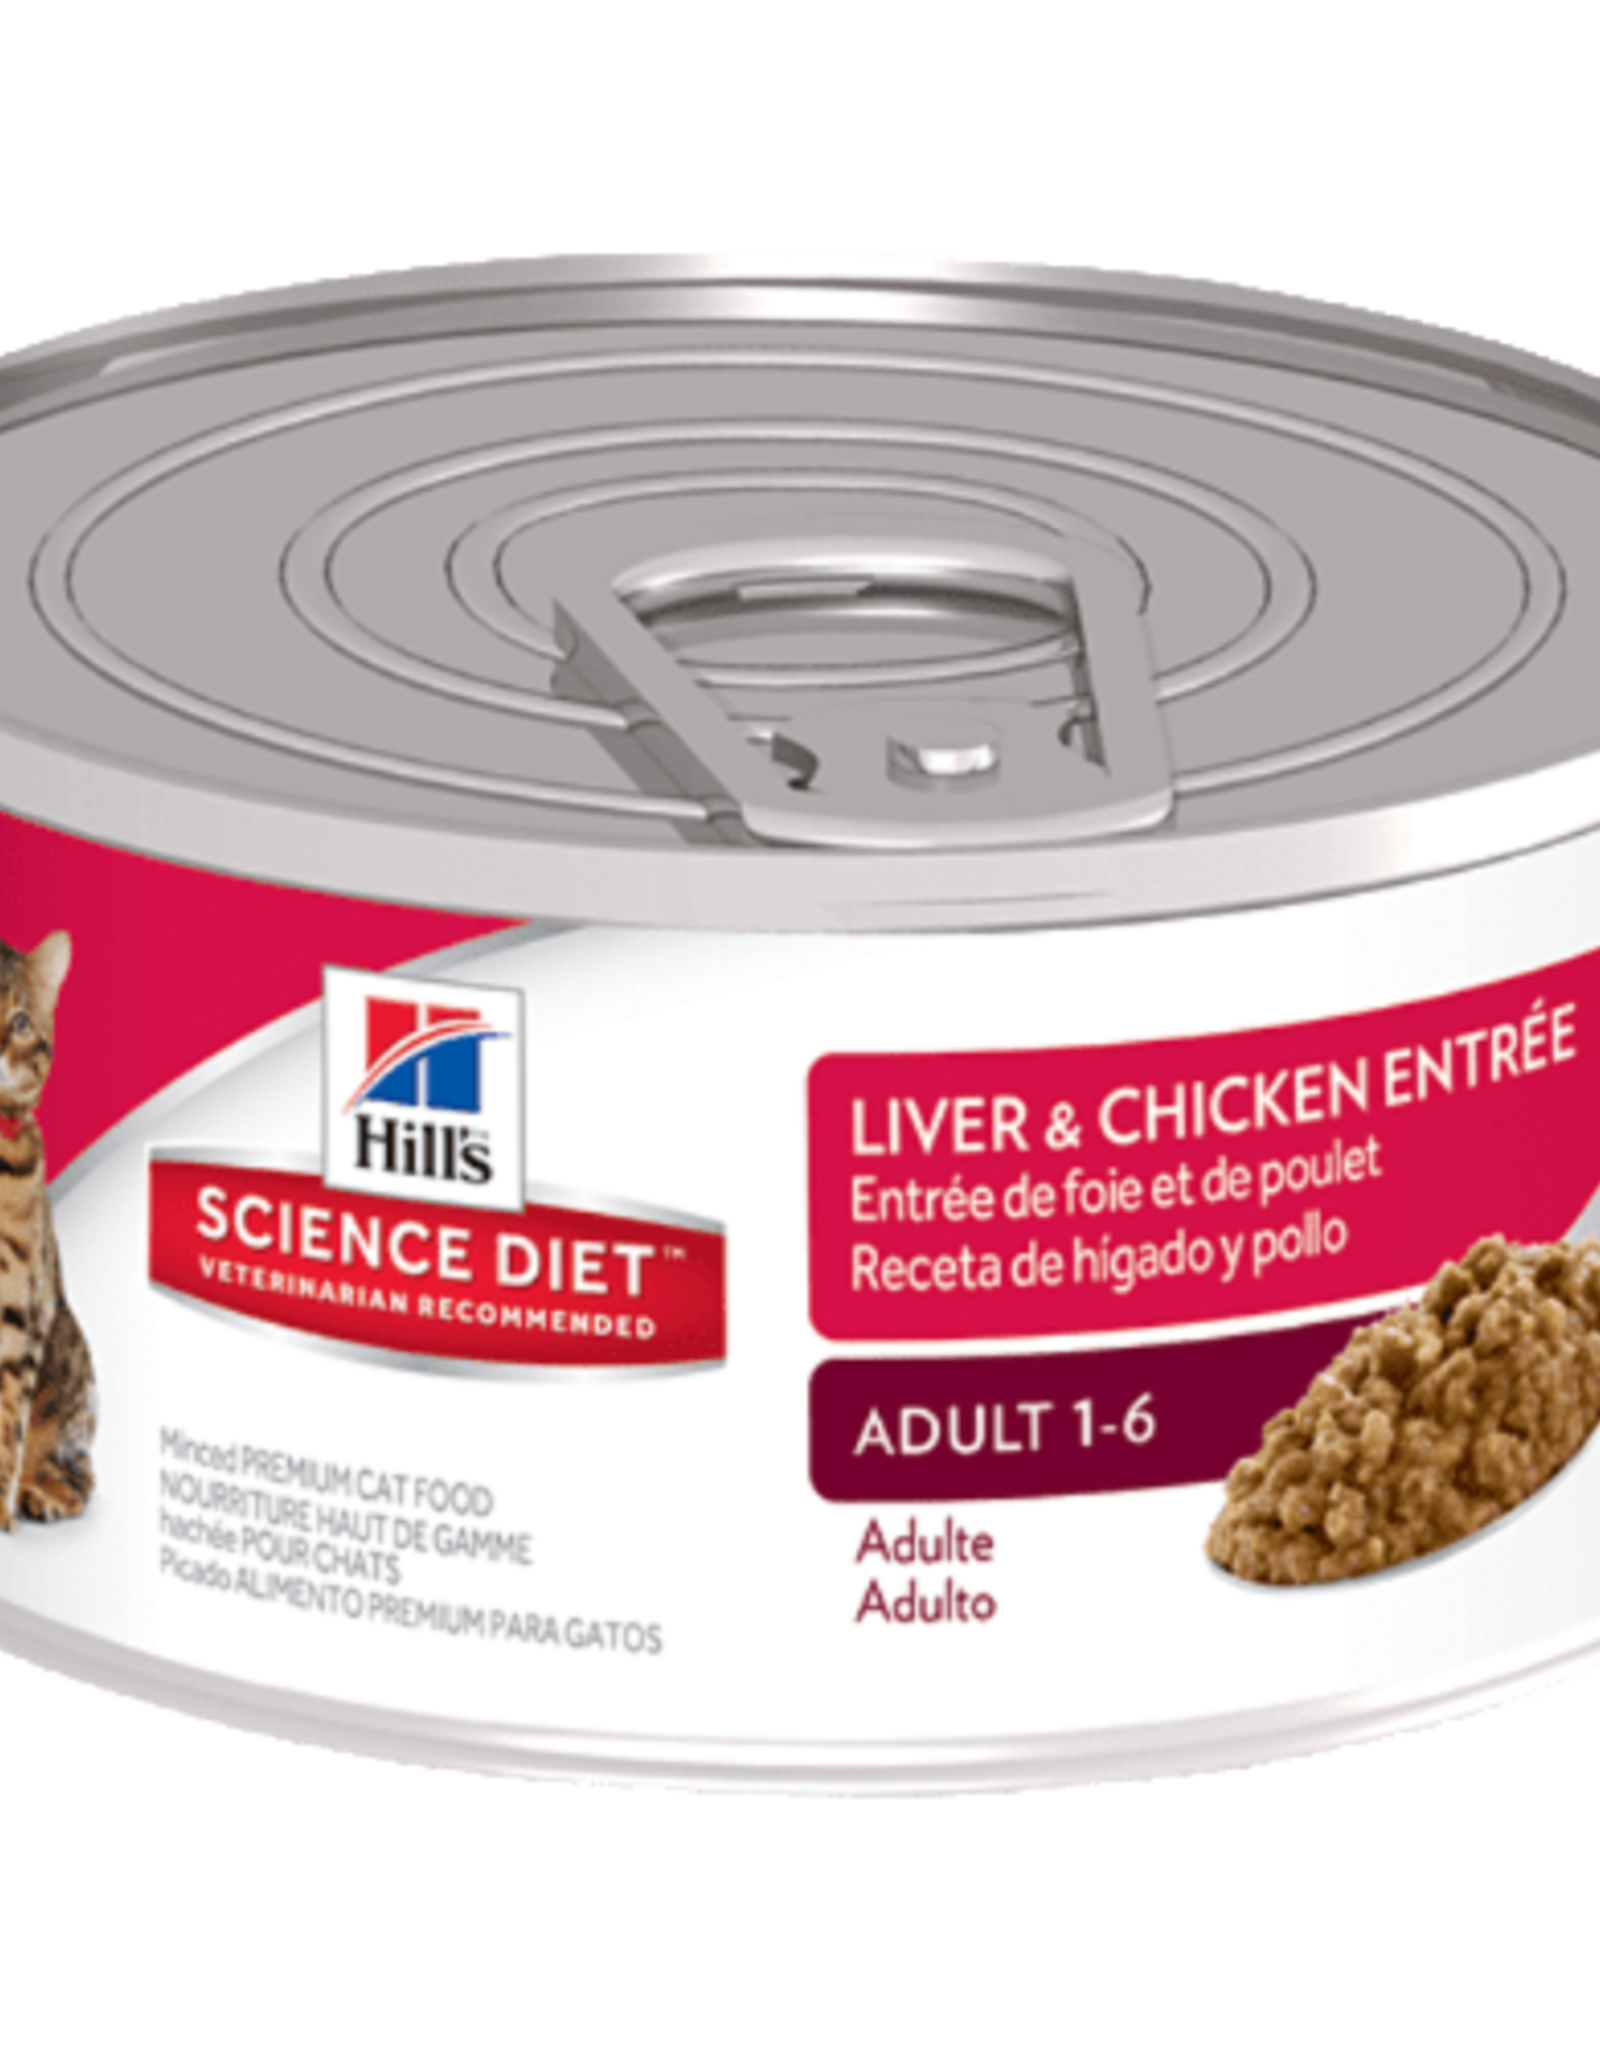 SCIENCE DIET HILL'S SCIENCE DIET CAT CAN ADULT LIVER & CHICKEN 5.5OZ CASE OF 24